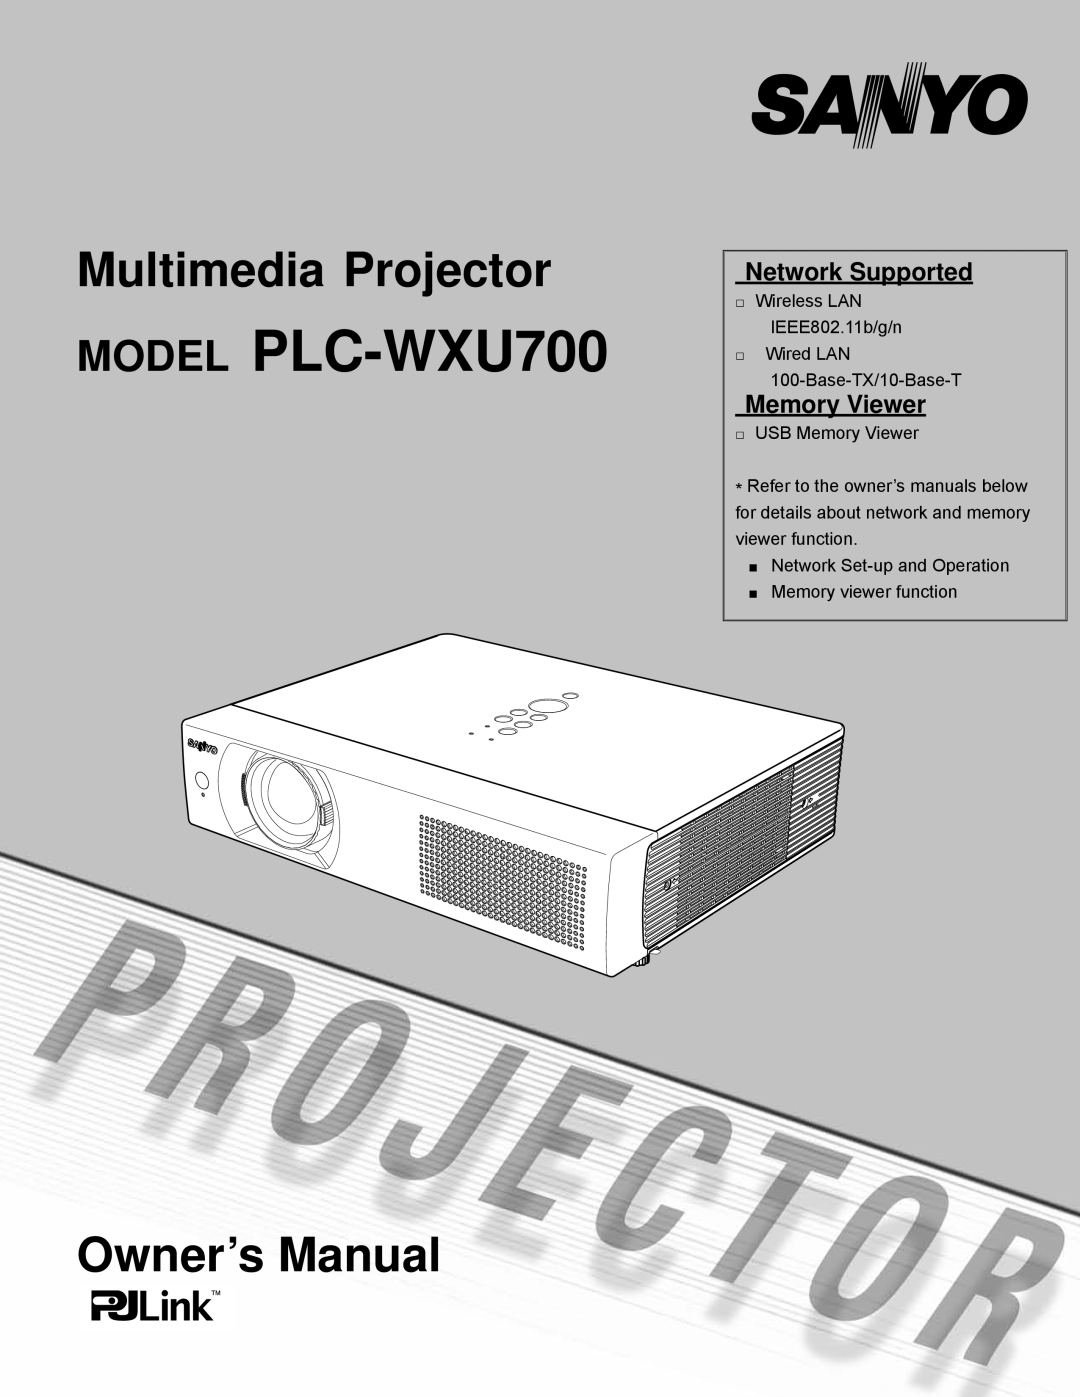 Sanyo owner manual Network Supported, Memory Viewer, MODEL PLC-WXU700, Multimedia Projector 